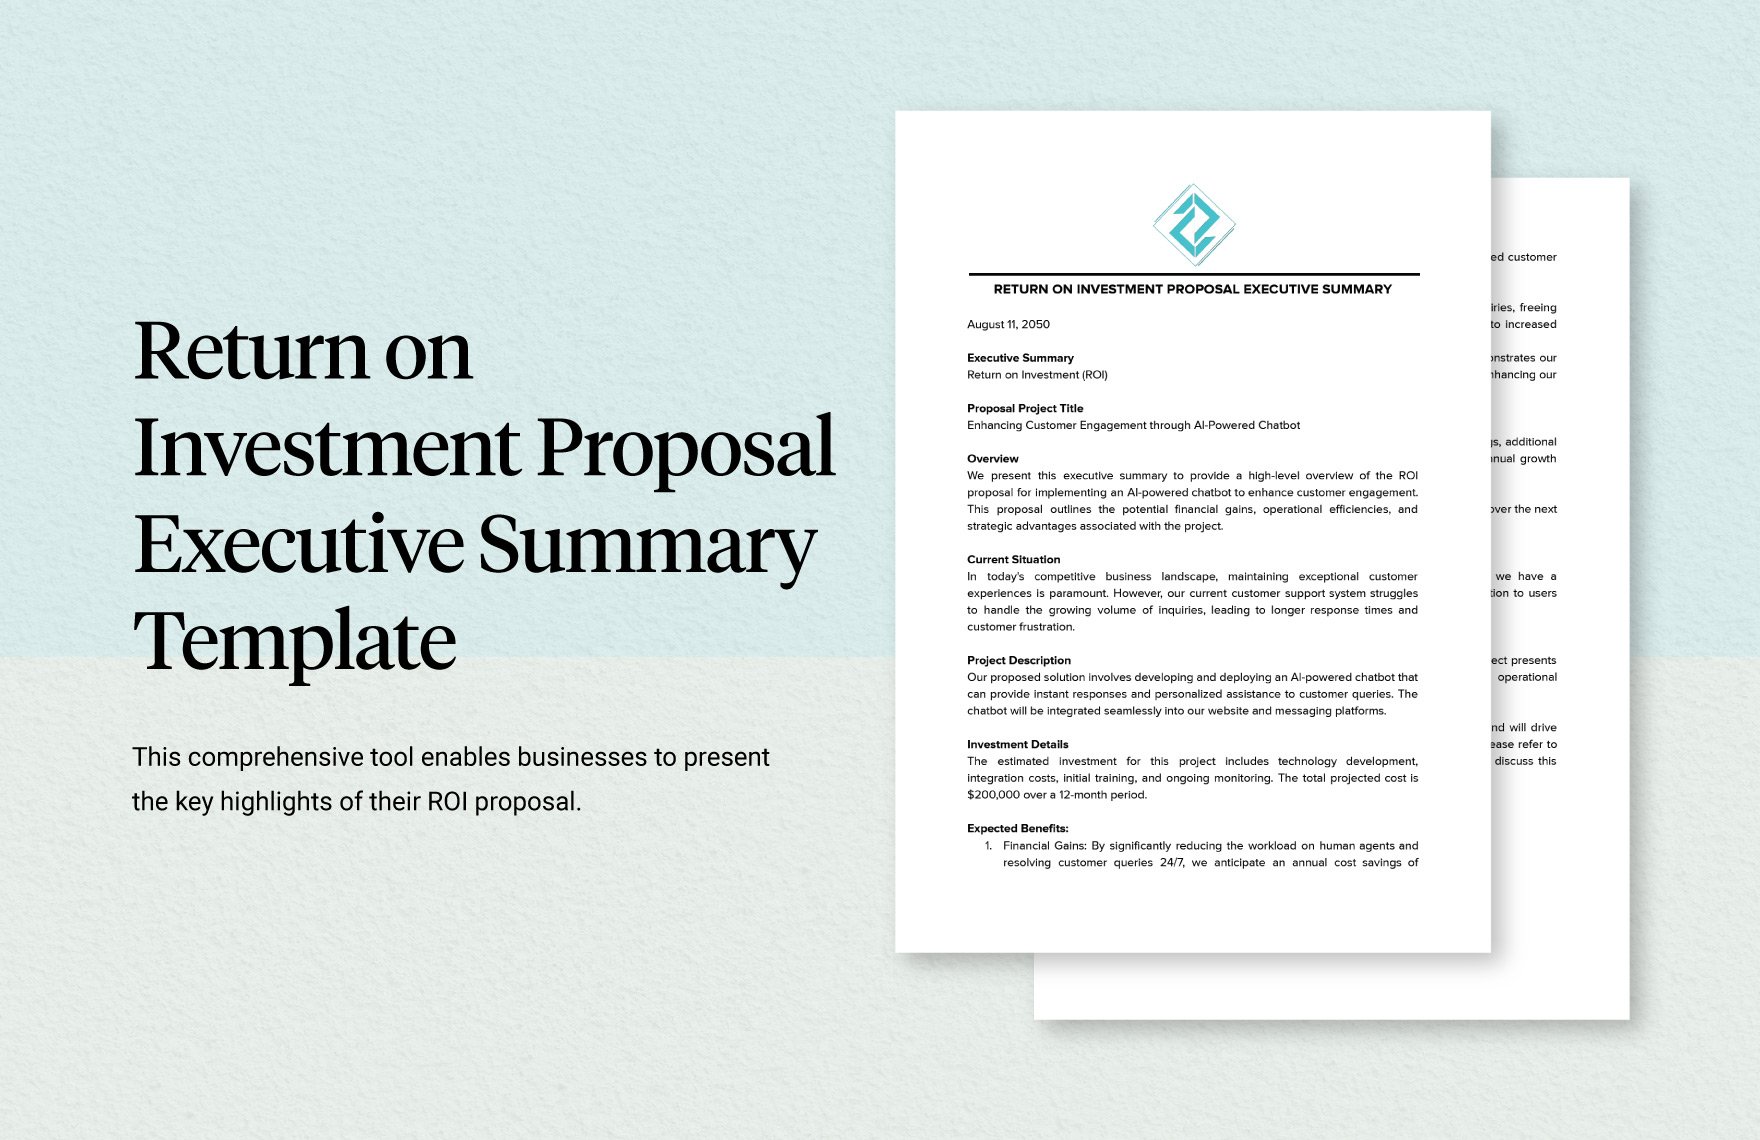 Return on Investment Proposal Executive Summary Template in Word, Google Docs, PDF